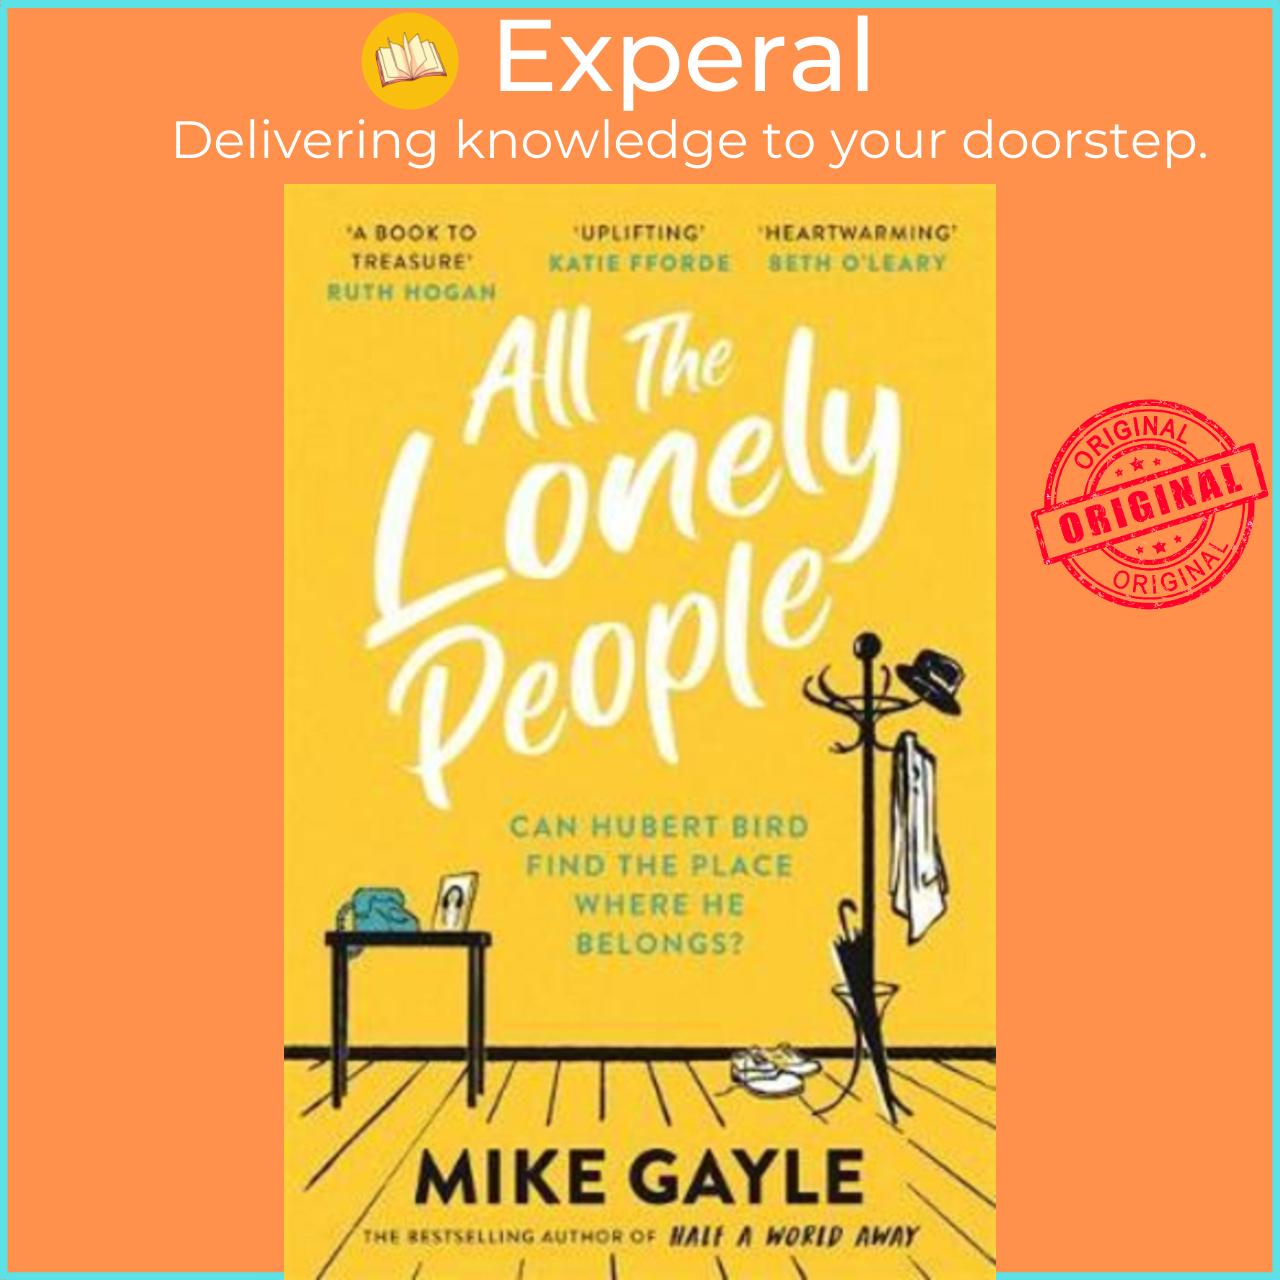 Sách - All The Lonely People : A warm, life-affirming story for these times by Mike Gayle (UK edition, paperback)